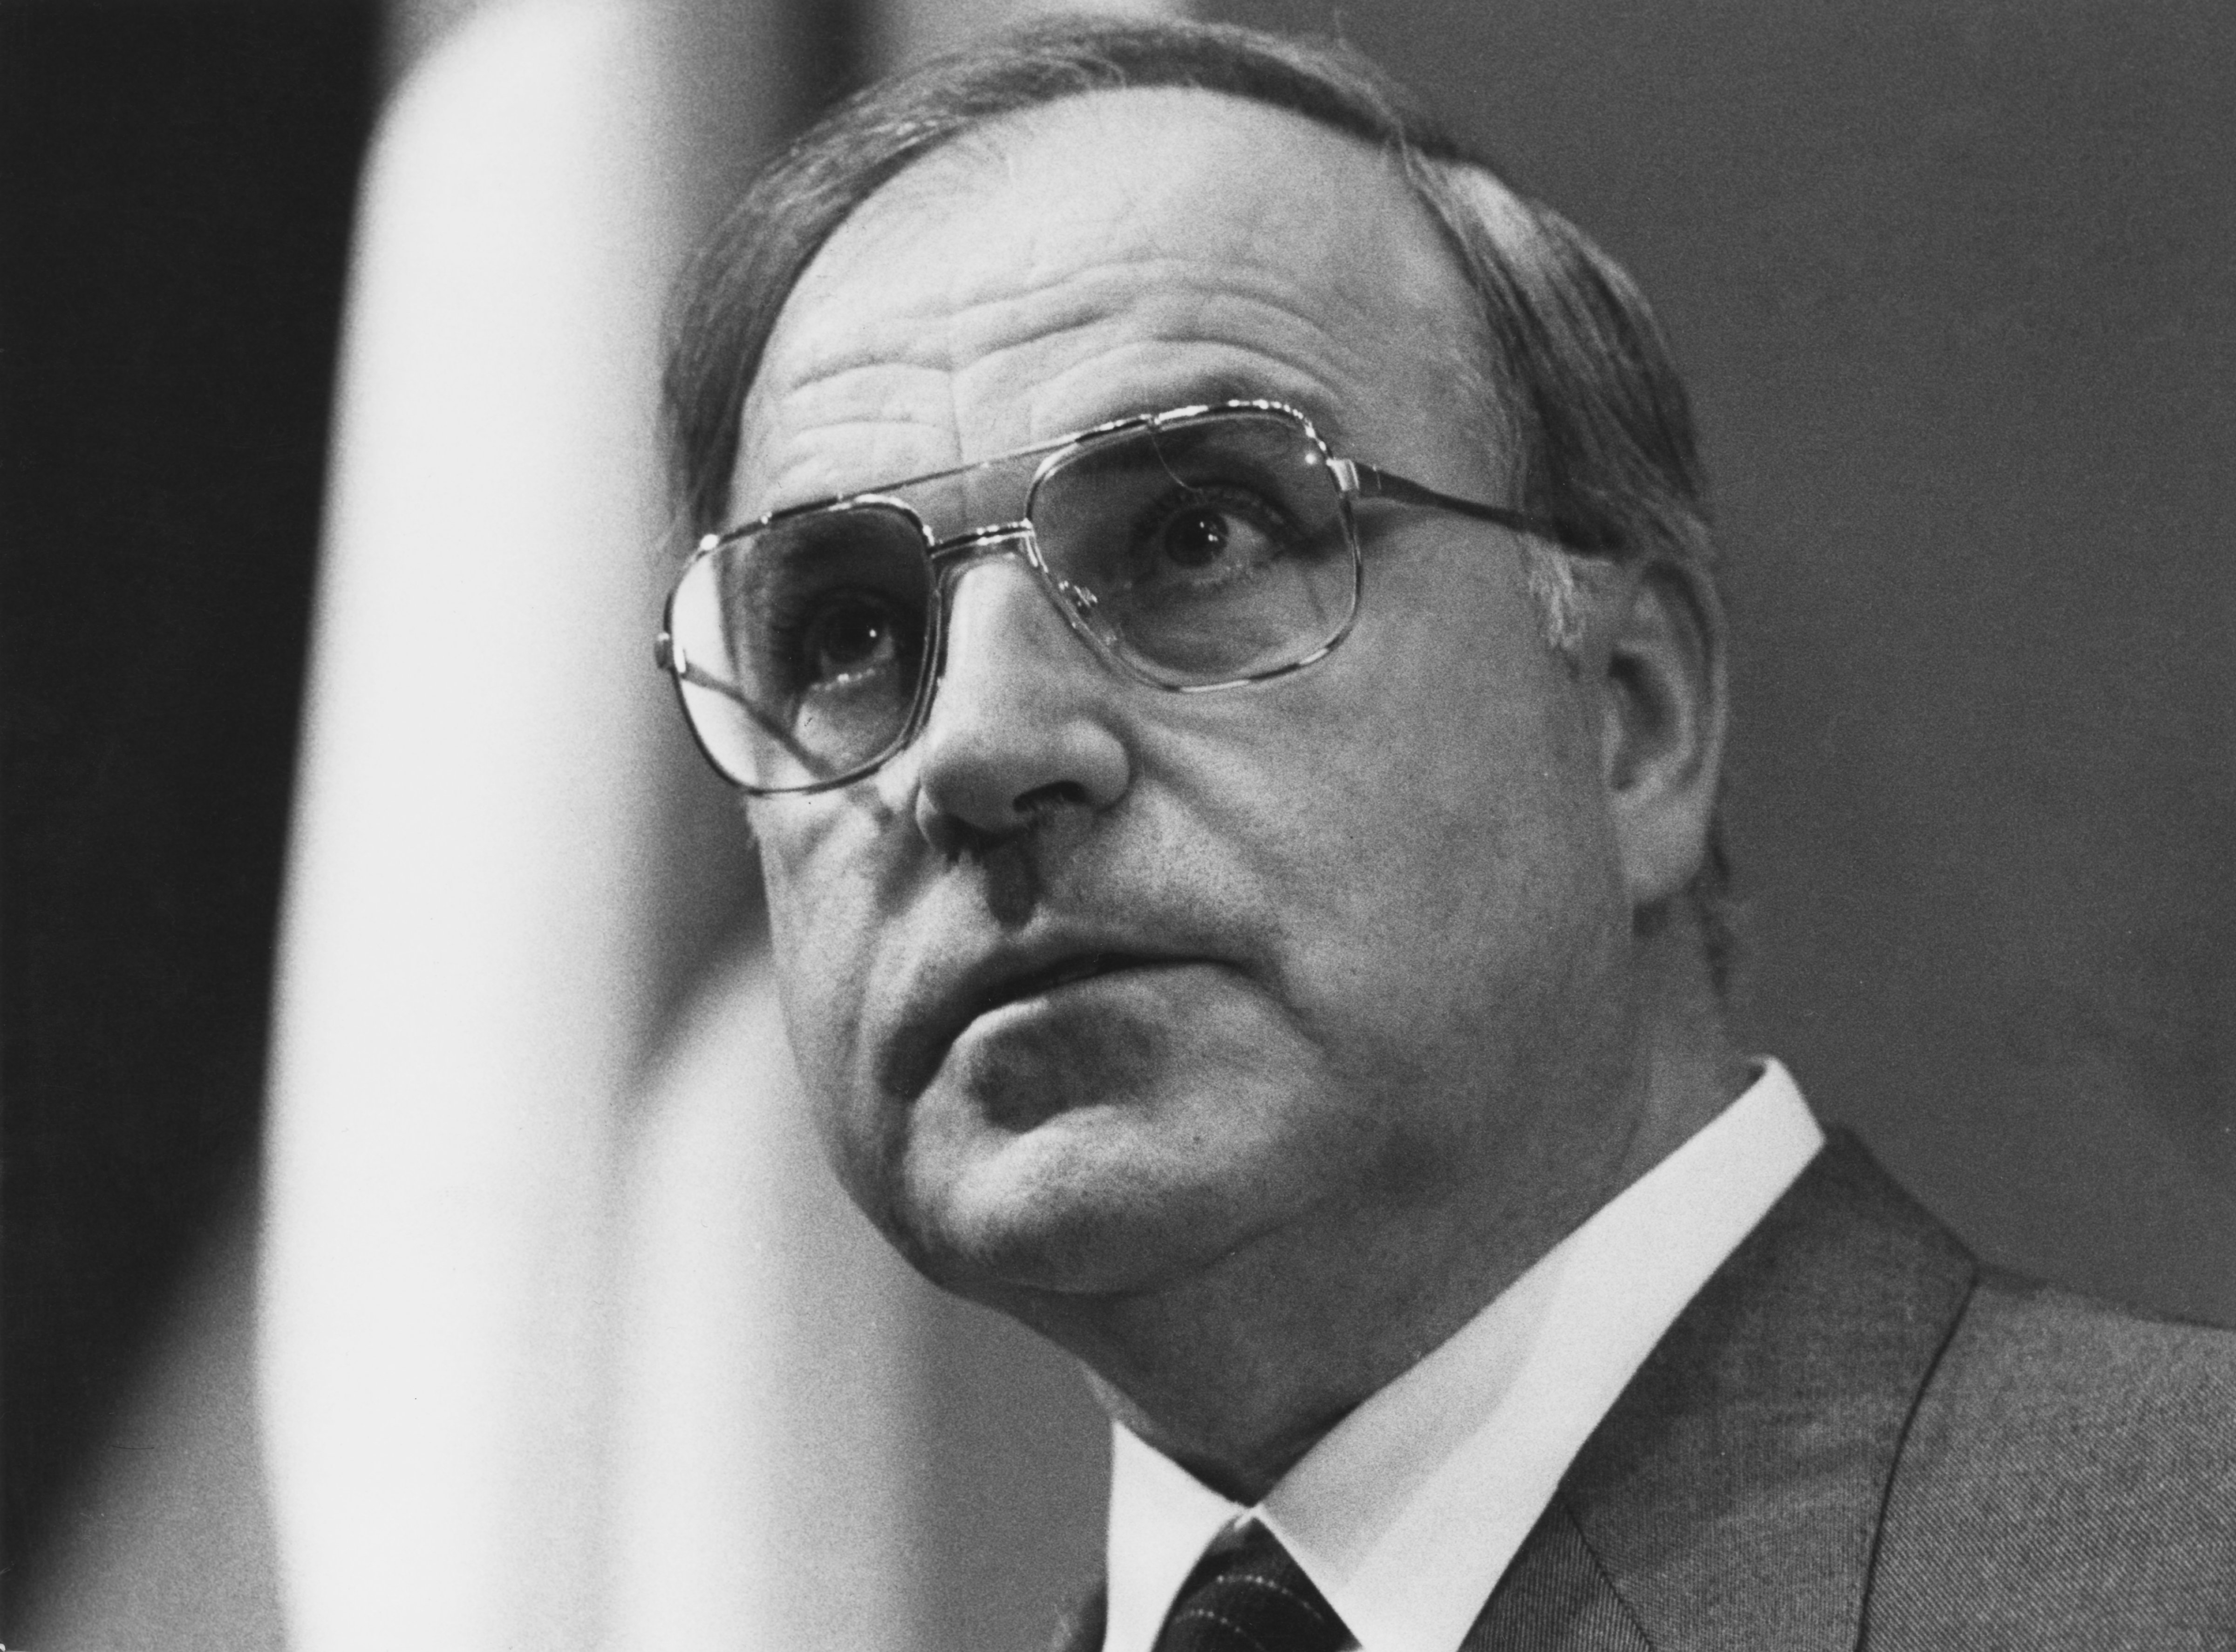 German politician Helmut Kohl, chairman of the opposition Christian Democratic Union (CDU), May 1981. (Keystone/Hulton Archive/Getty Images)